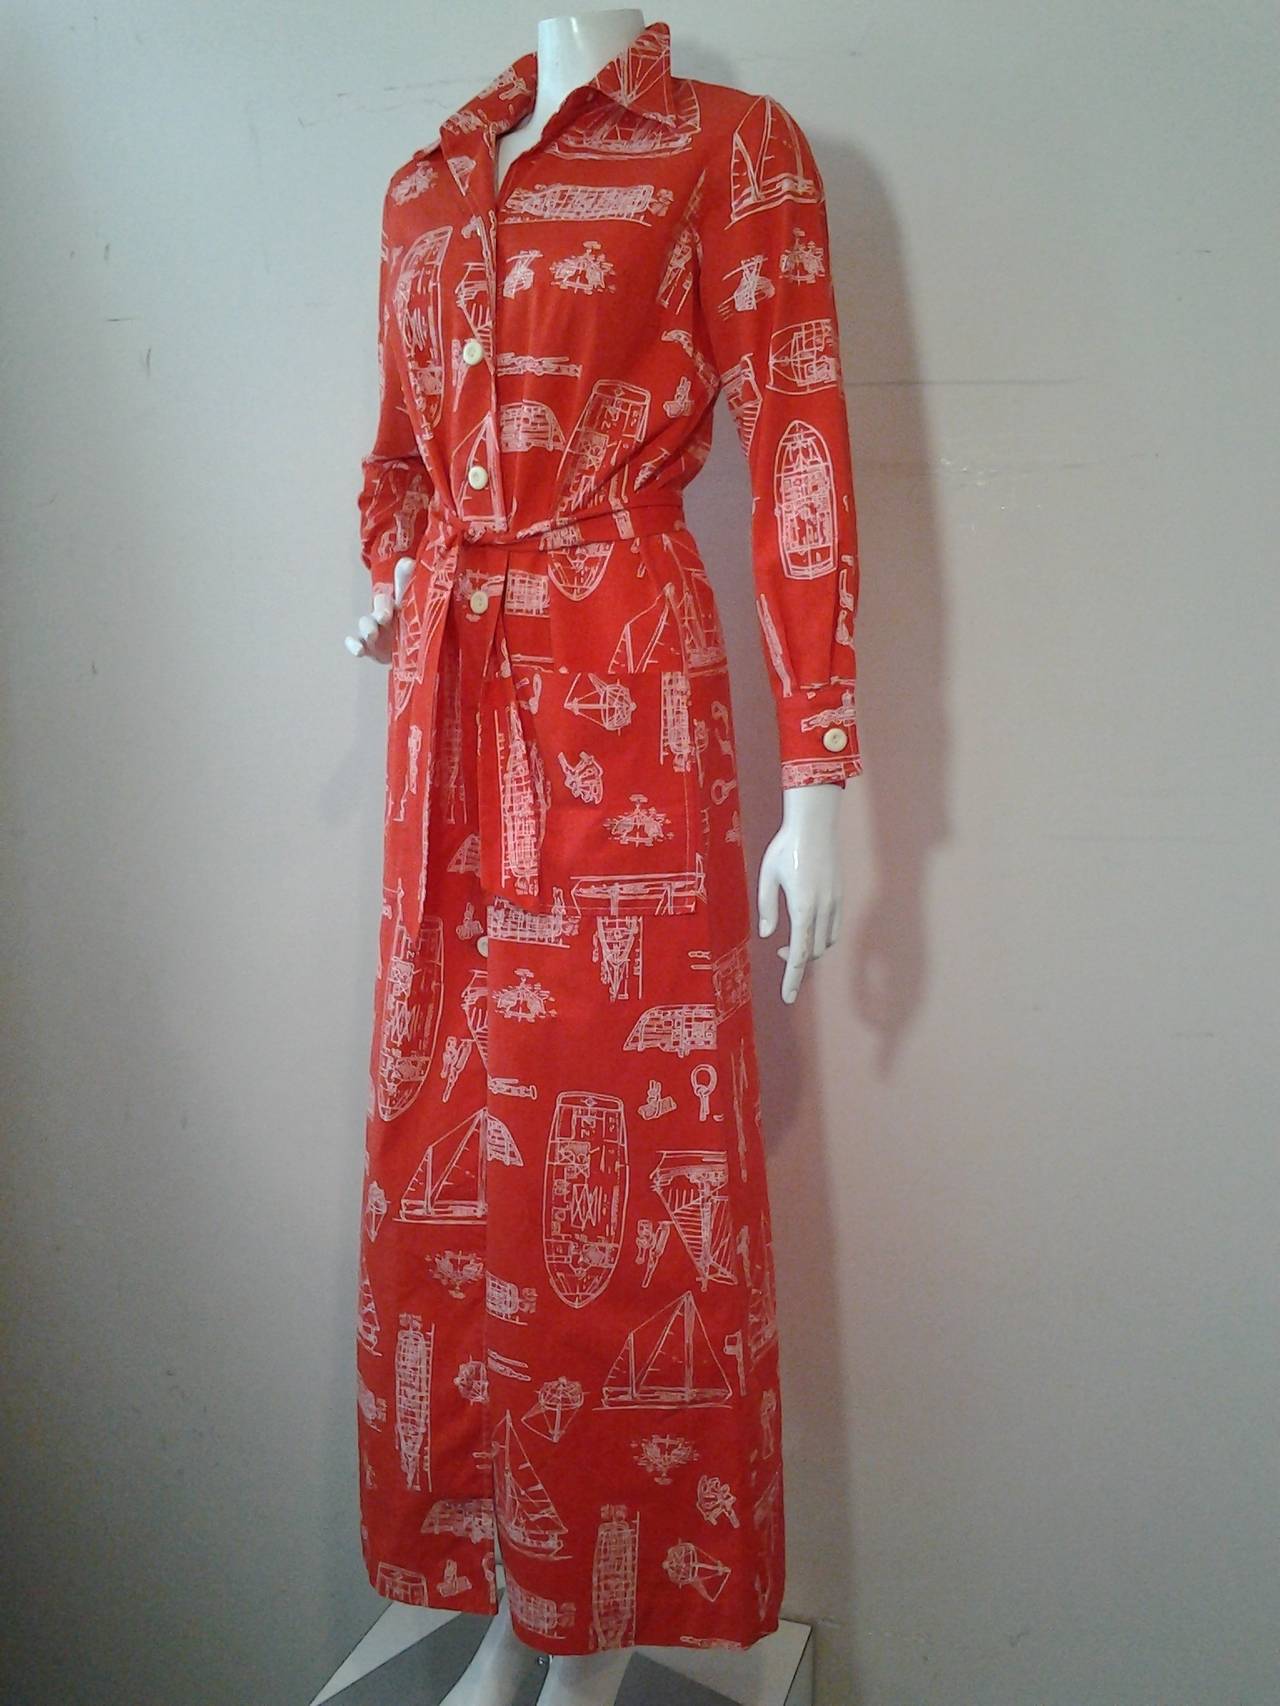 A fabulous 1960s cotton Tori Richard for I. Magnin Honolulu, Hawaii nautical print maxi dress in tomato red and white with button down front and matching belt.